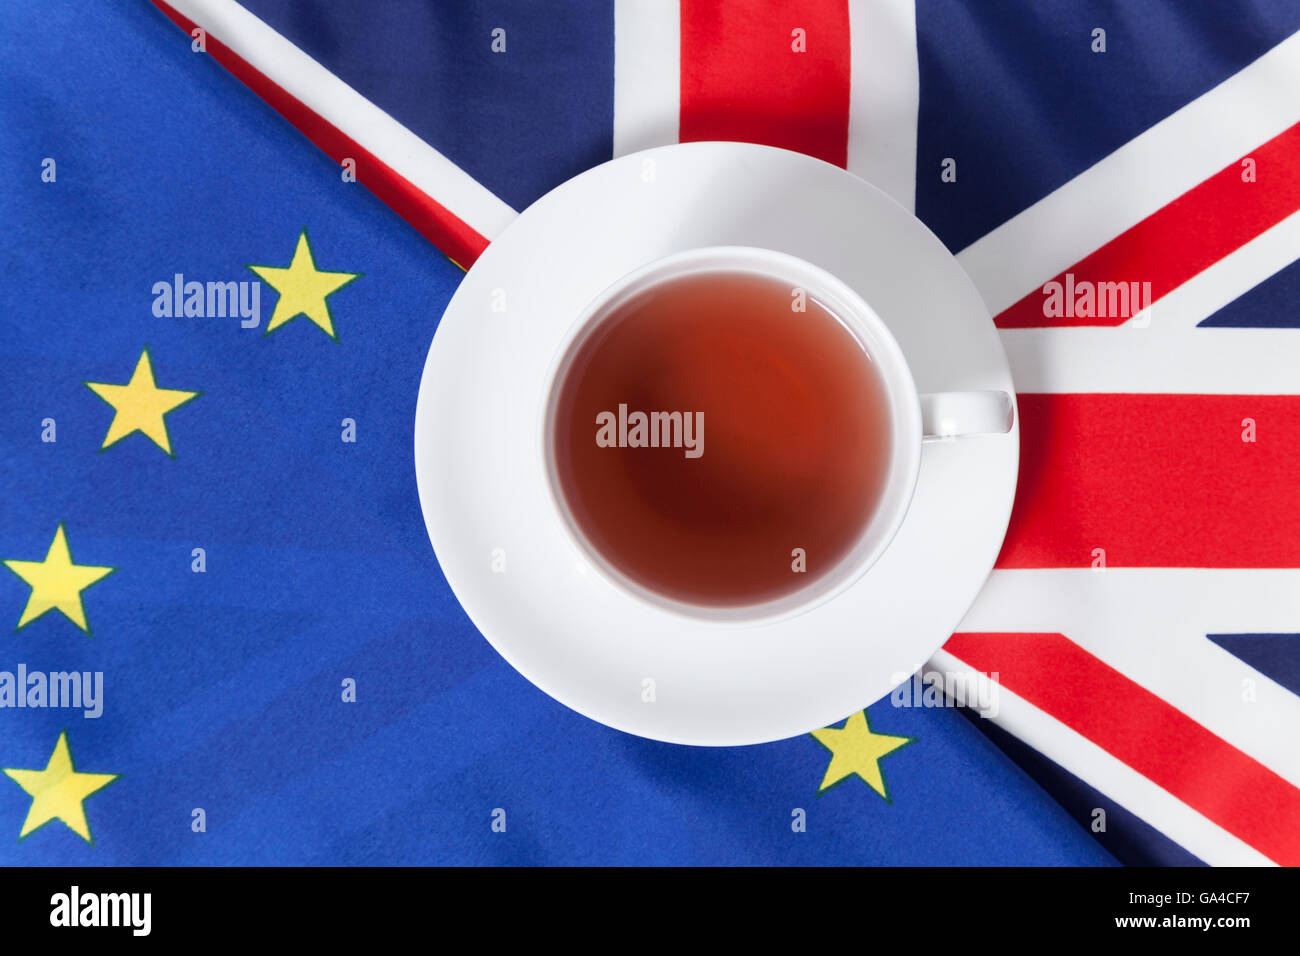 EU and GB flag and cup of tea (Brexit symbol photo) Stock Photo